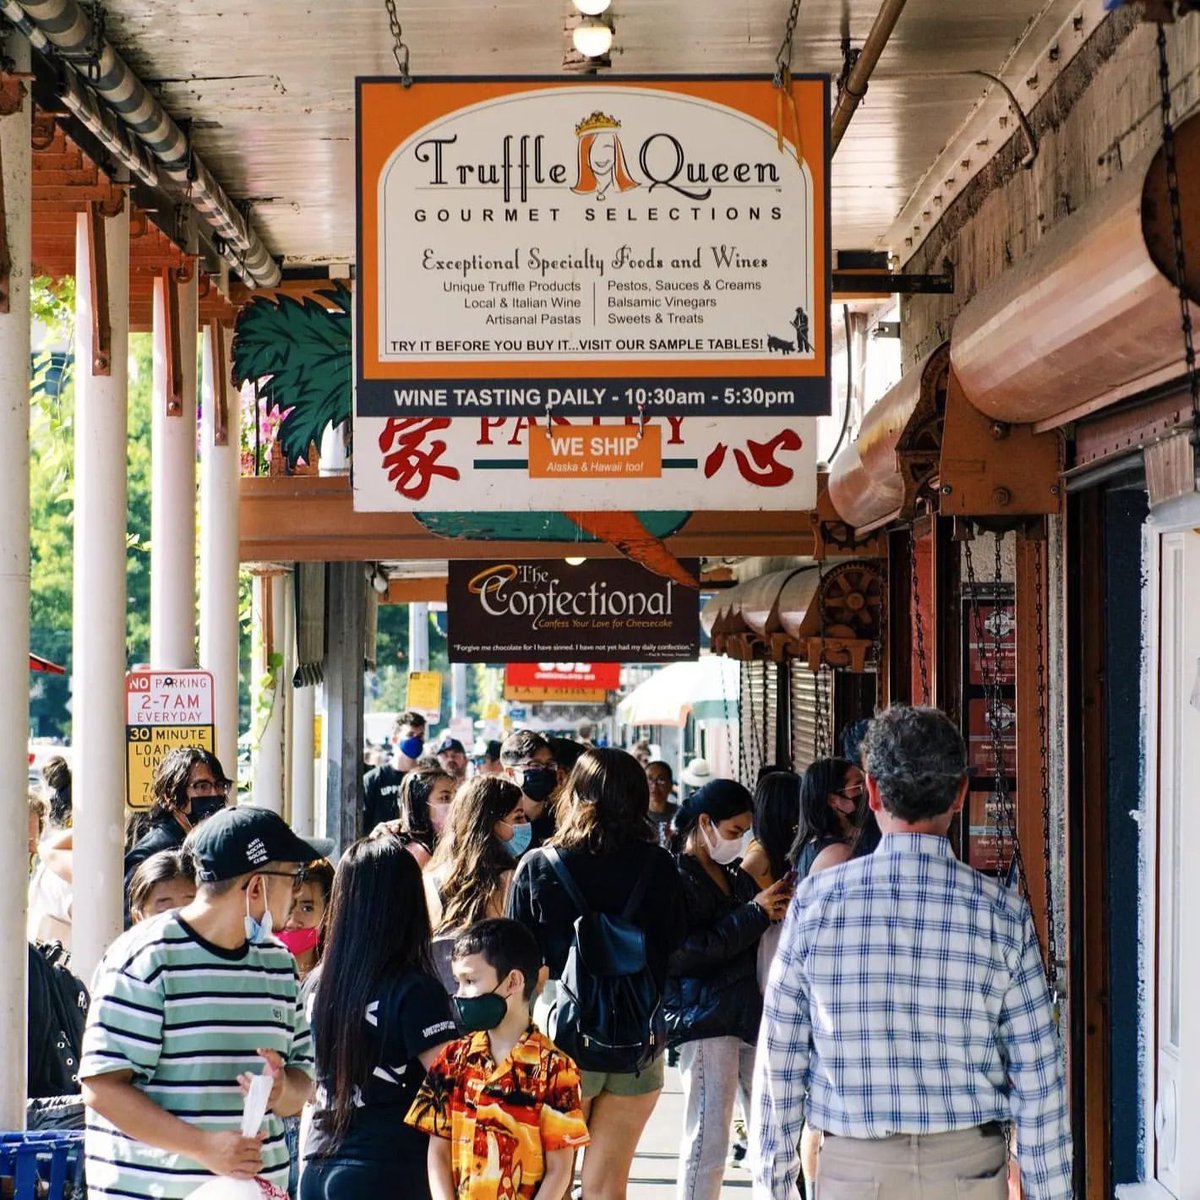 Did you know Pike Place Market now has local delivery? Get fruits & veggies, fresh baked goods & Market staples like Truffle Queen and @Confectional delivered directly to your door. Learn more: PikePlaceMarket.org/LocalDelivery #PikePlaceMarket #MakeItAMarketDay